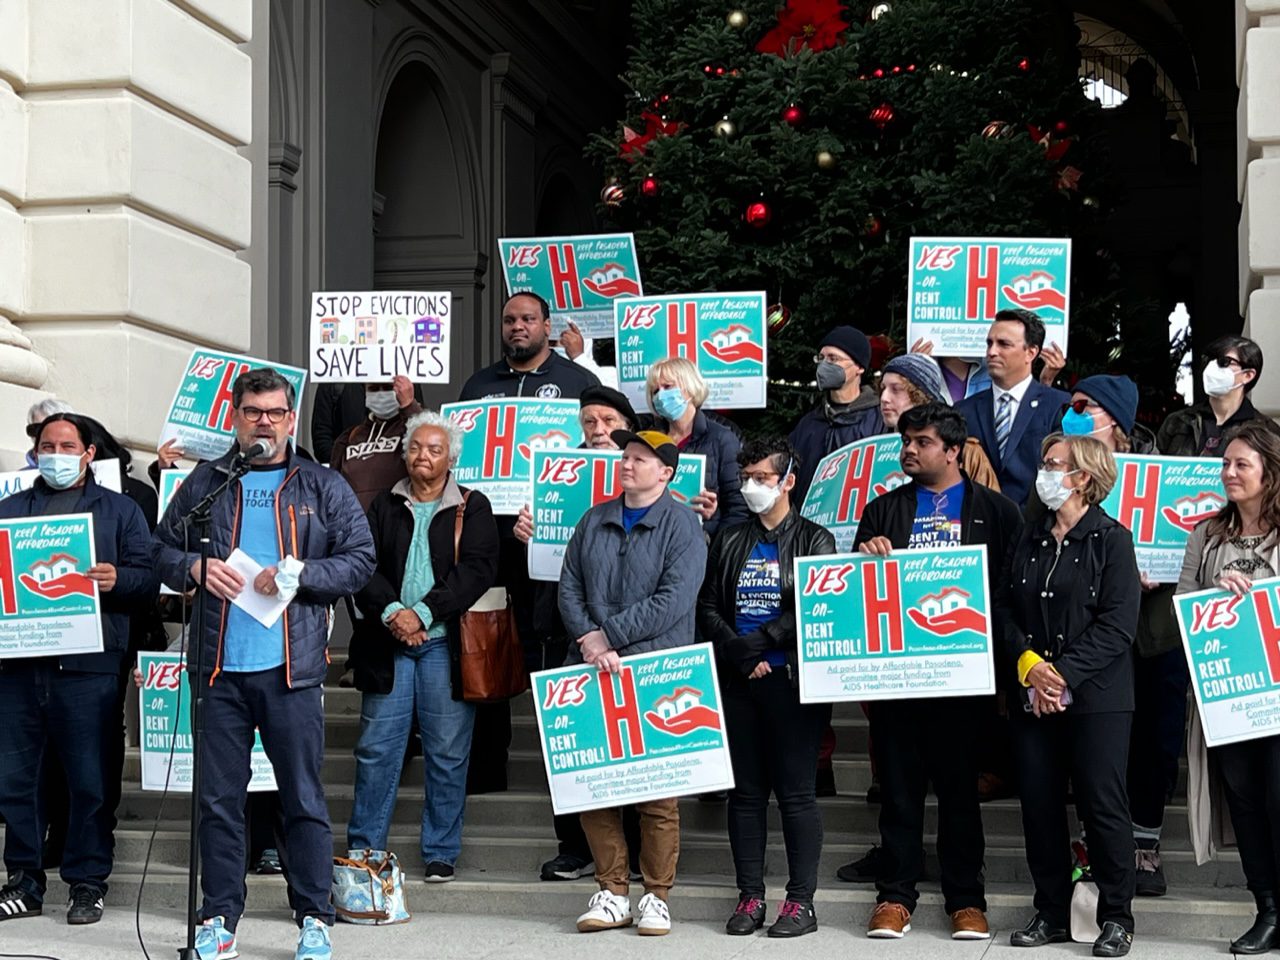 A group of people standing on steps, most holding signs saying "Yes on Rent Control" while at left a man speaks into a microphone. Behind the people, faintly visible, is a large holiday tree with red and silver ornaments.